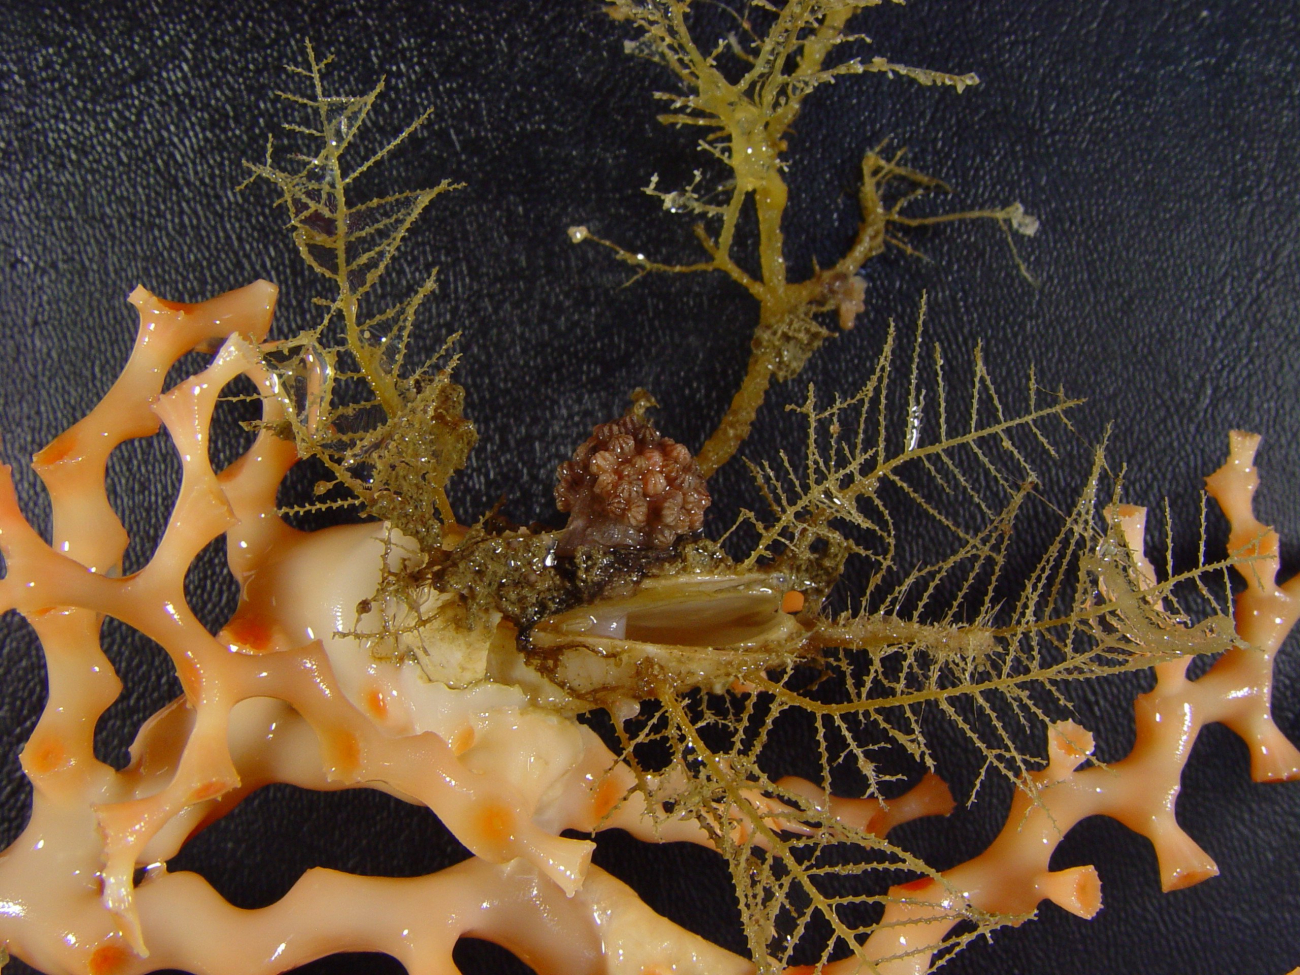 Coral of the genus Madrepora with numerous attached invertebrates